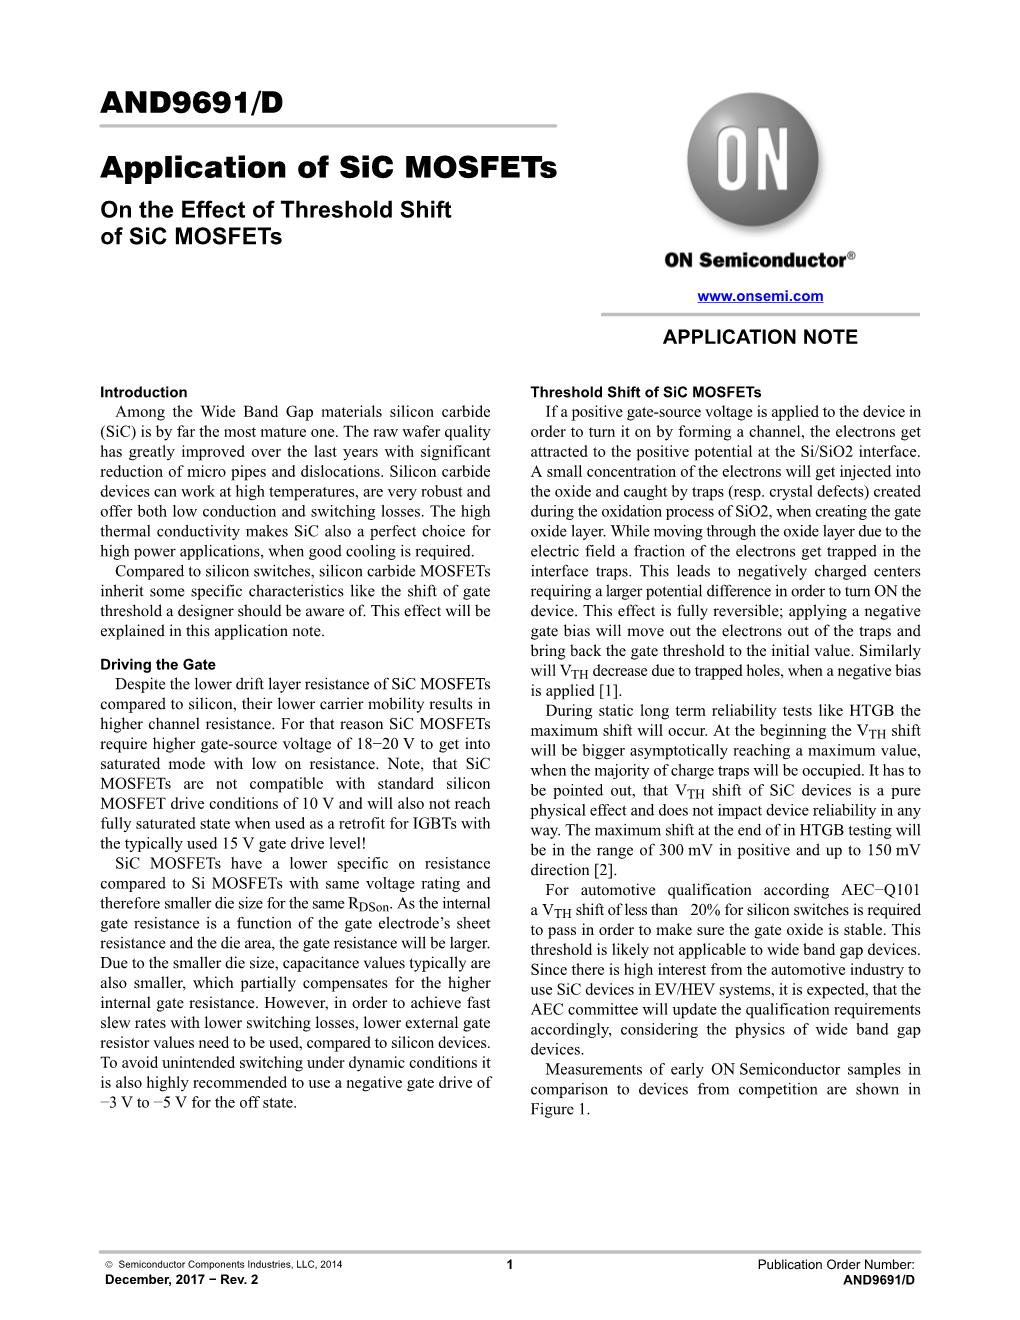 Application of Sic Mosfets on the Effect of Threshold Shift of Sic Mosfets